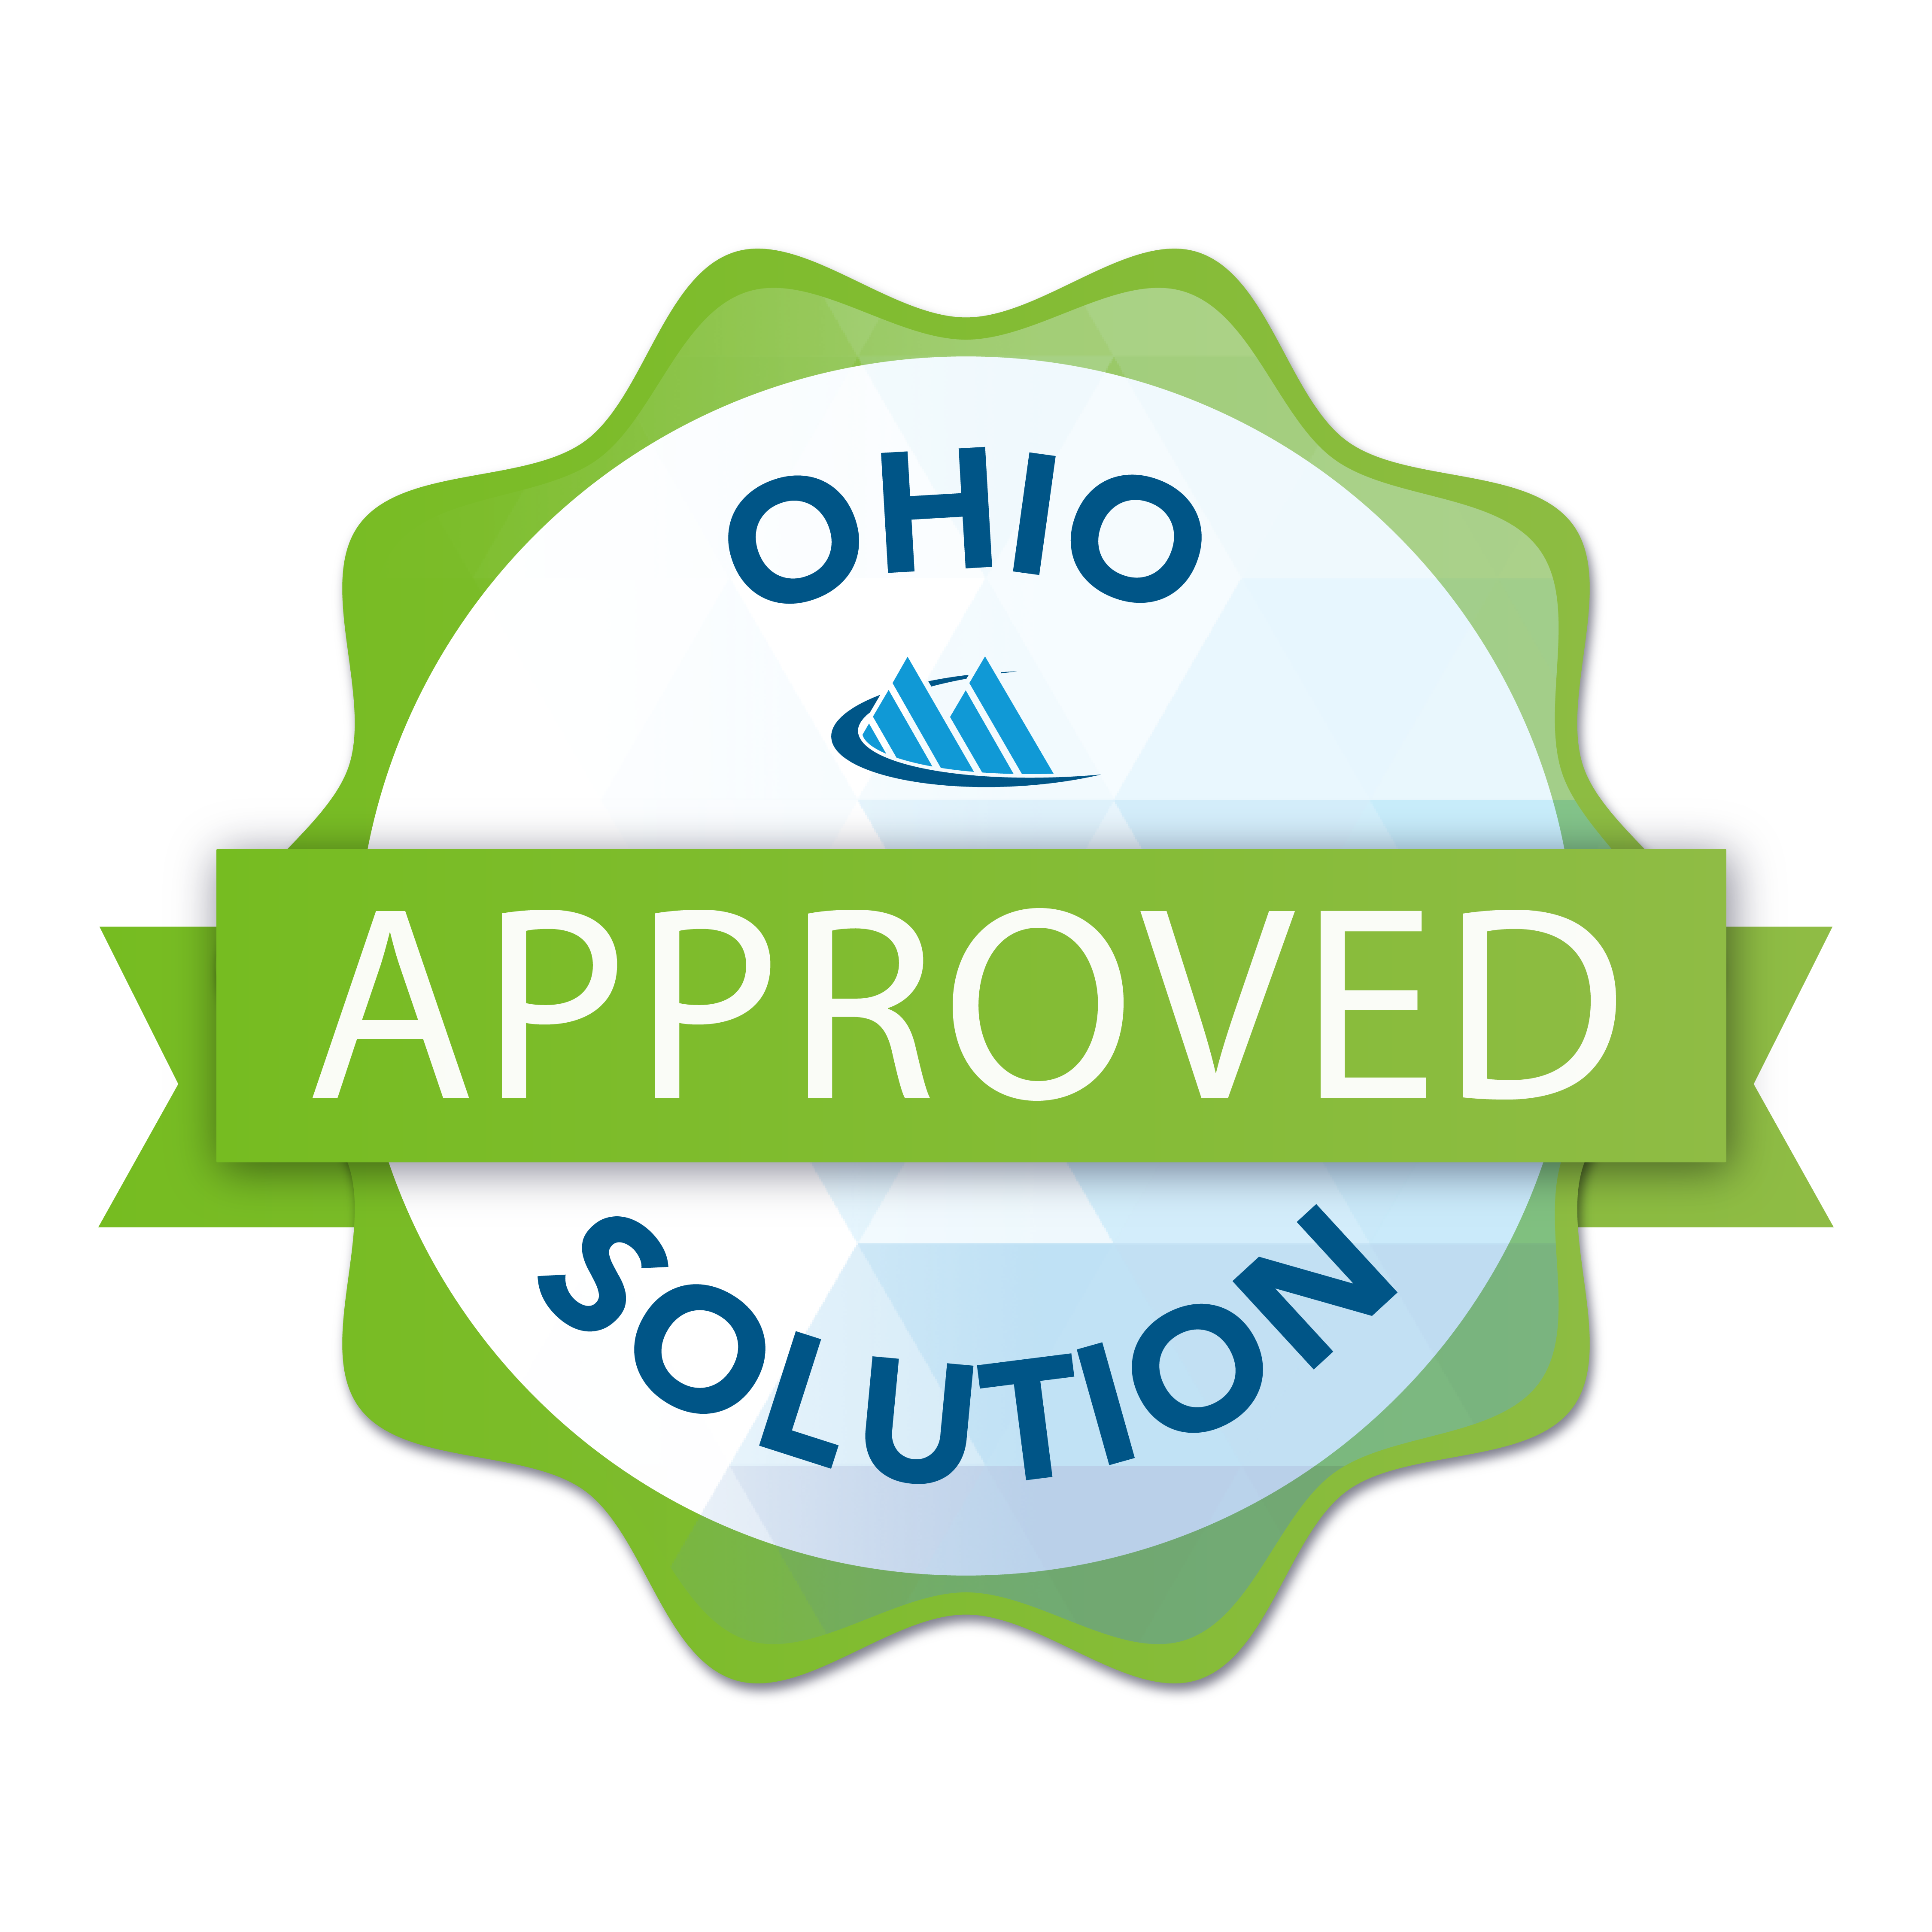 Ohio Approved Solution Badge